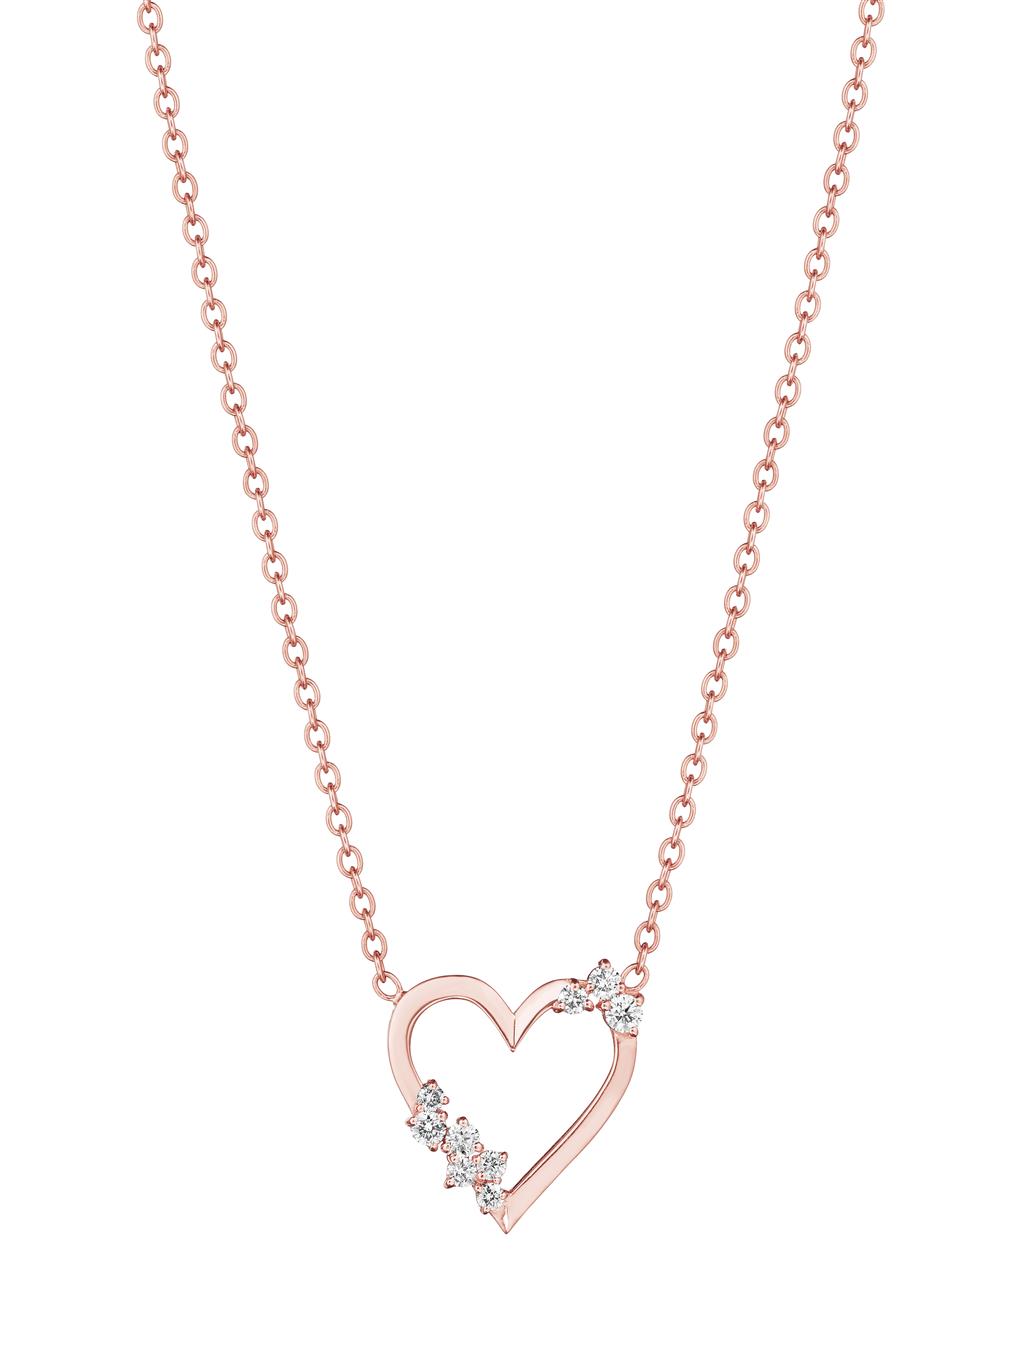 Penny Preville Open Stardust Accent Heart Necklace